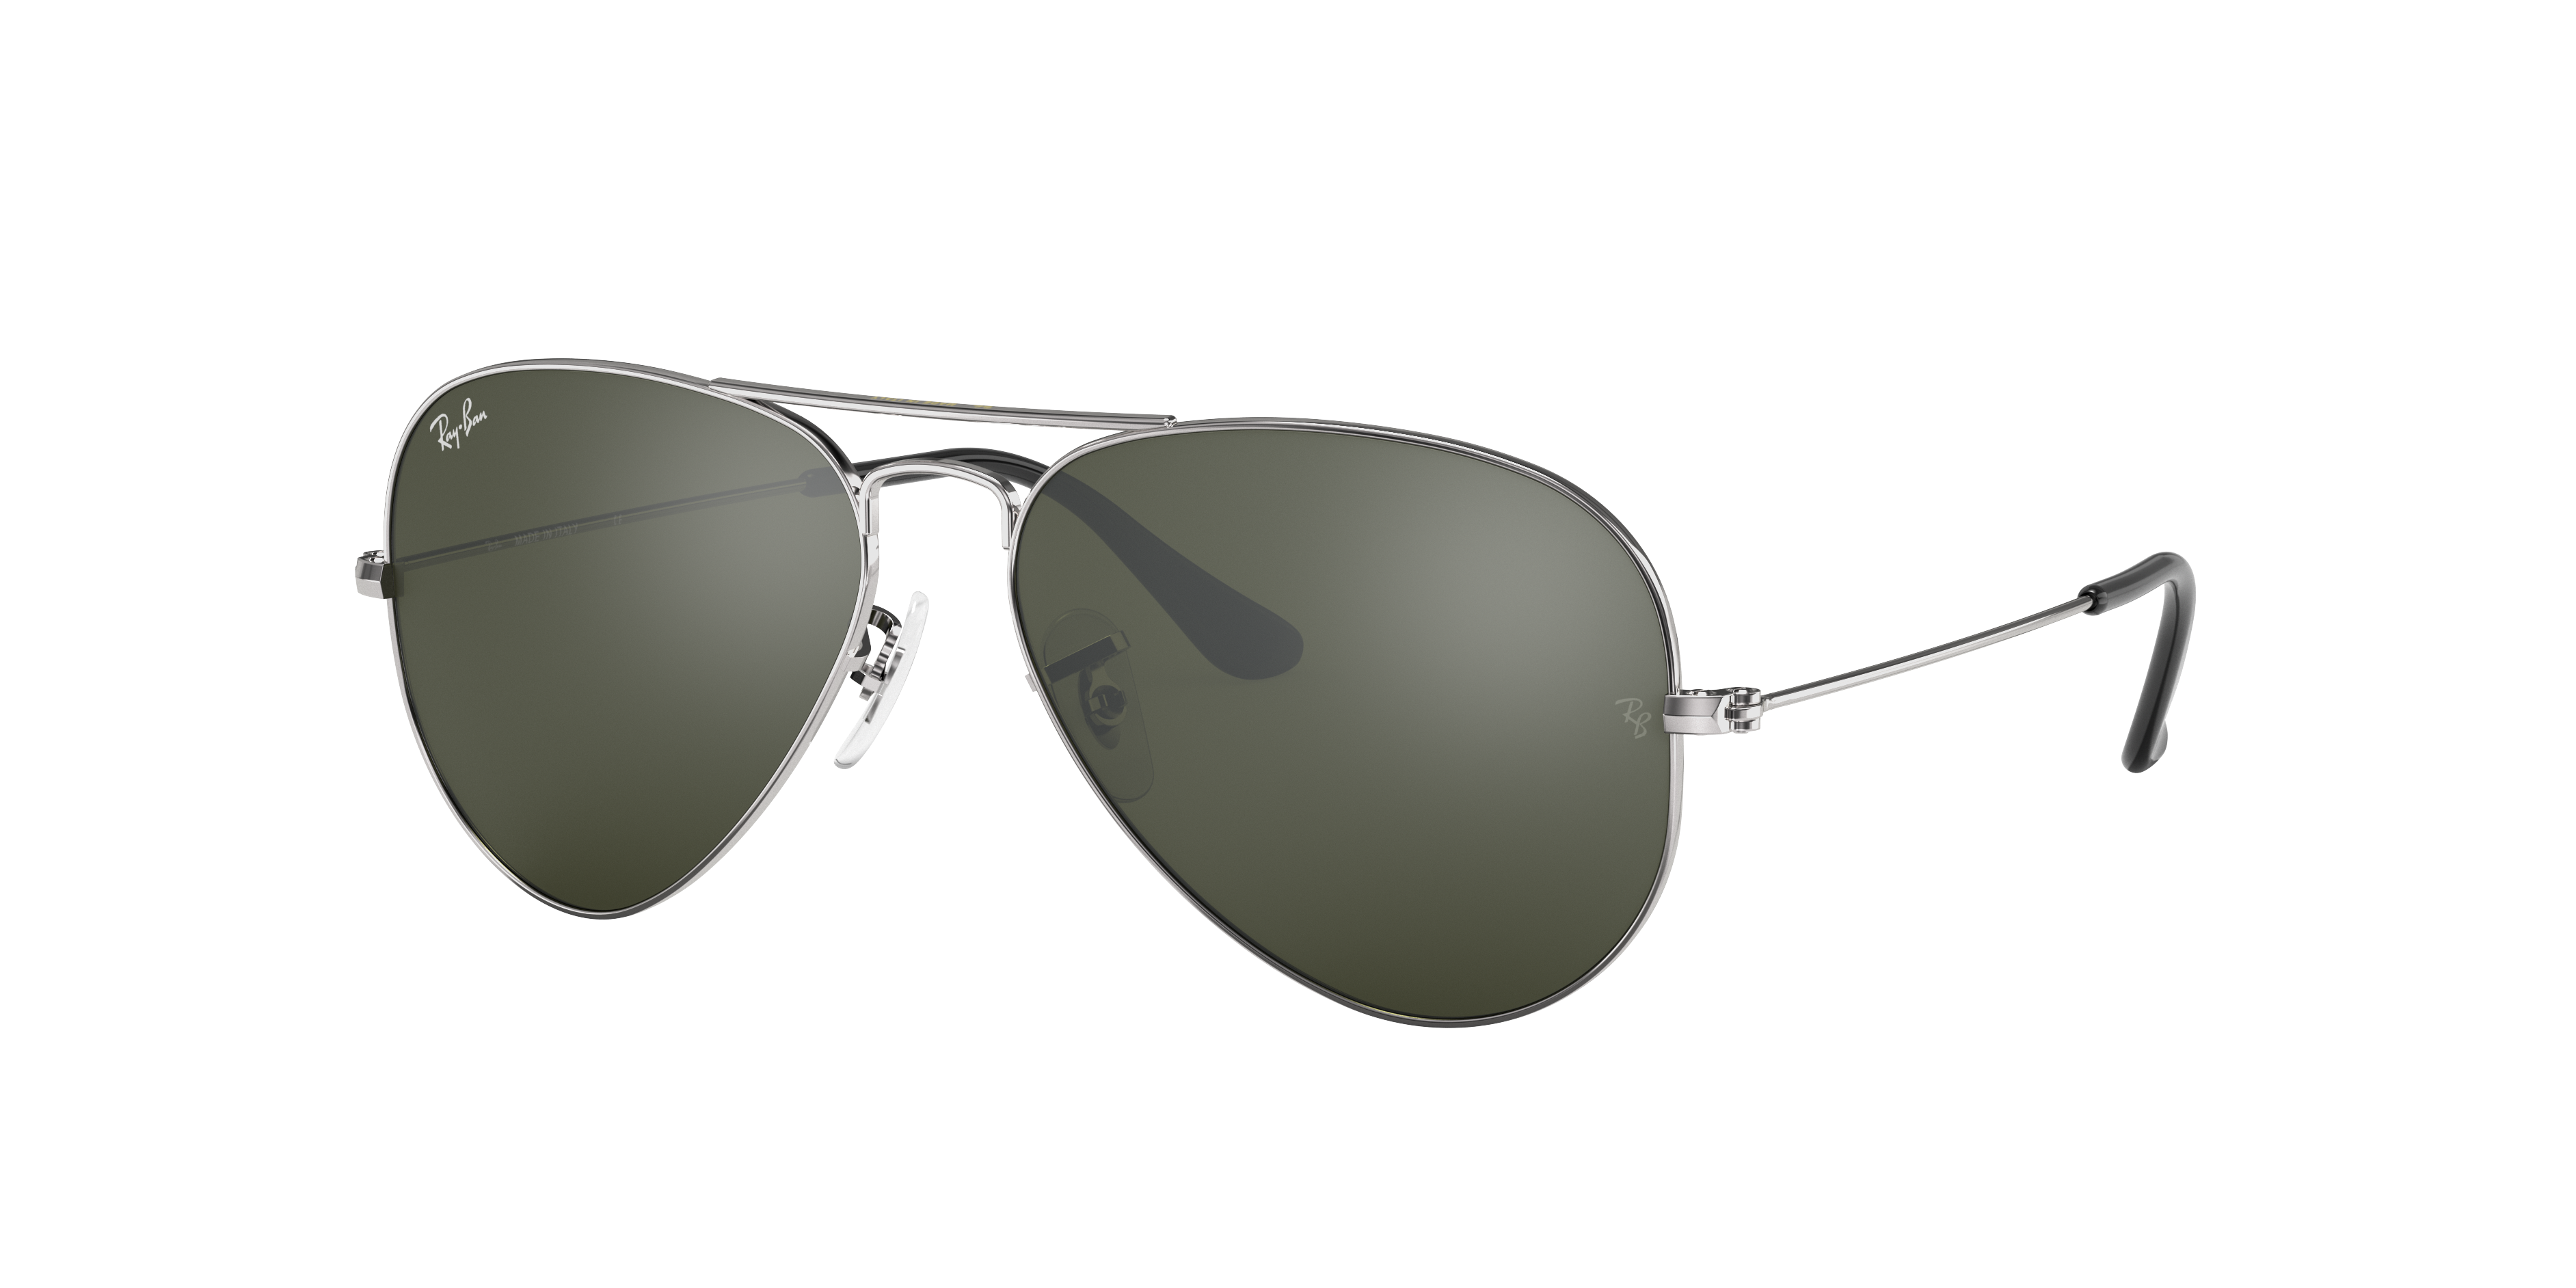 ray ban spectacles uk